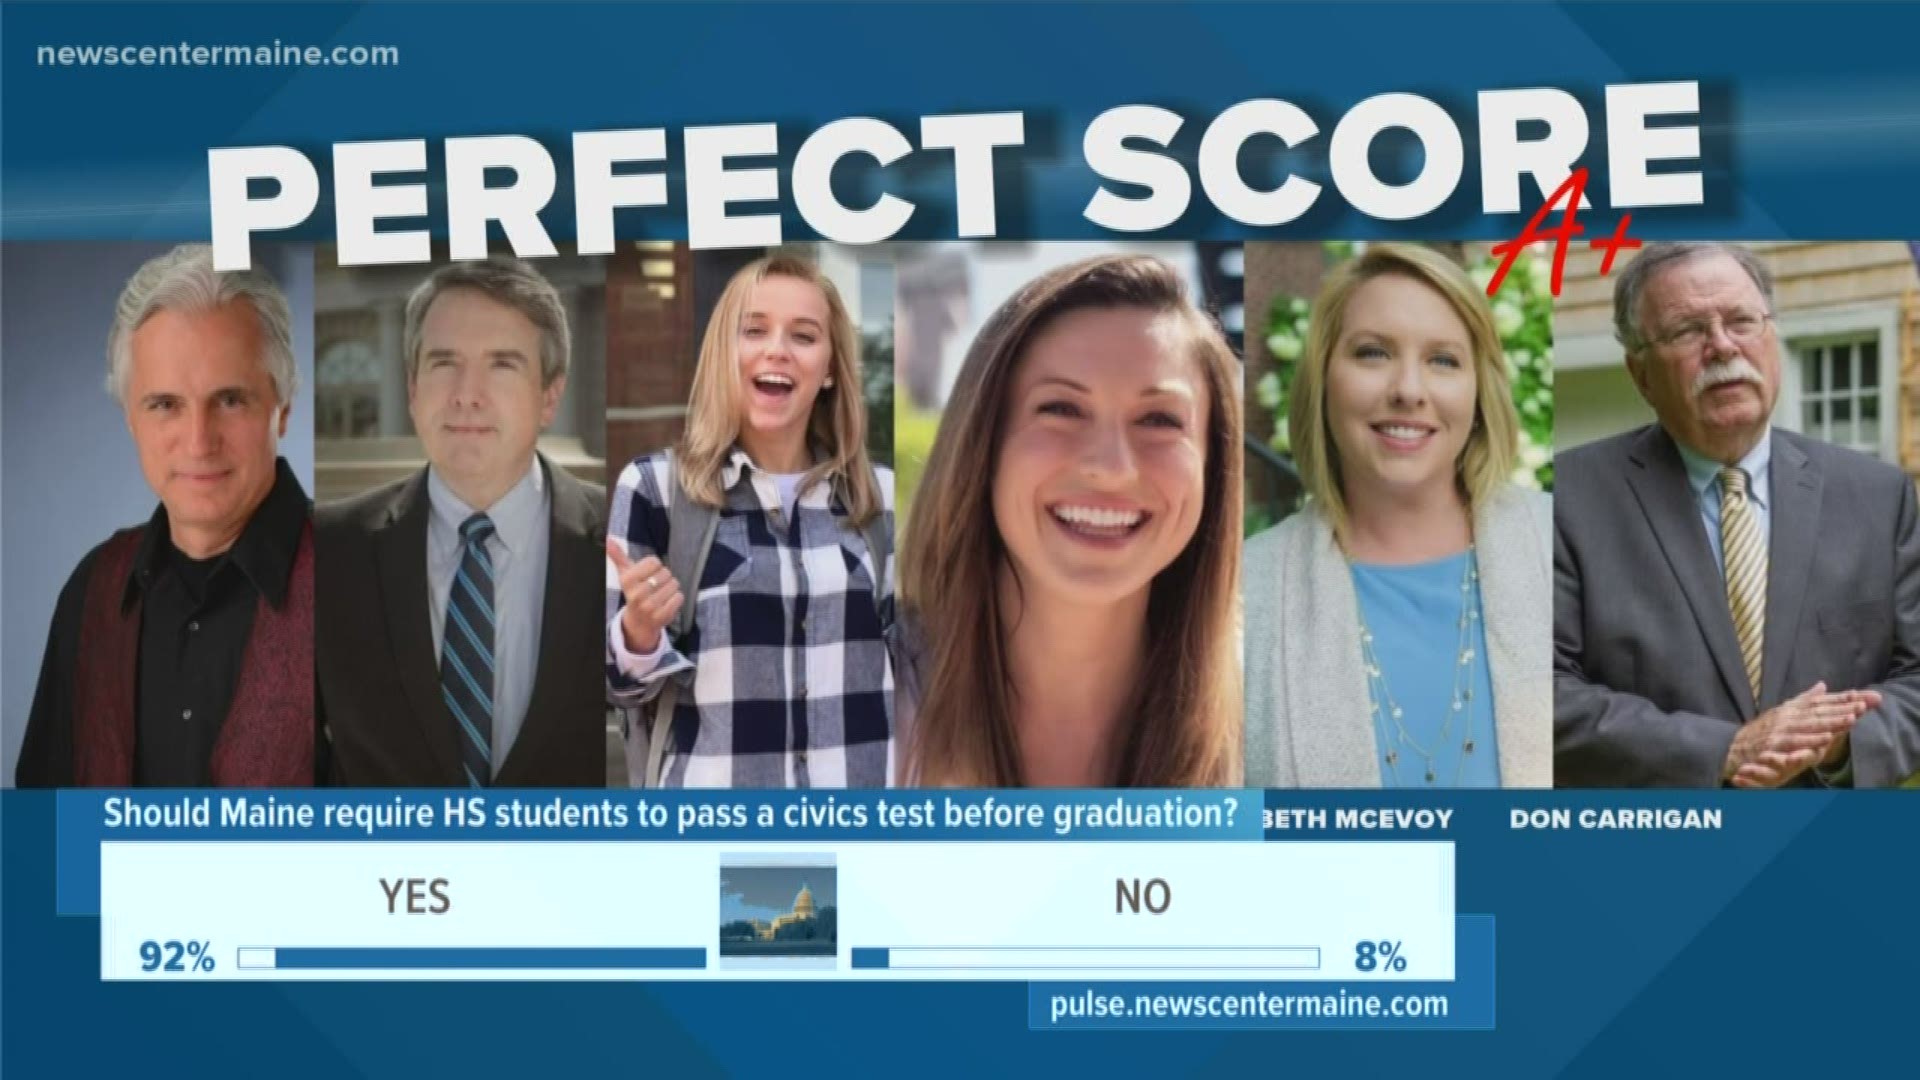 Our on-air talent can pass a high school civics test. Can you?